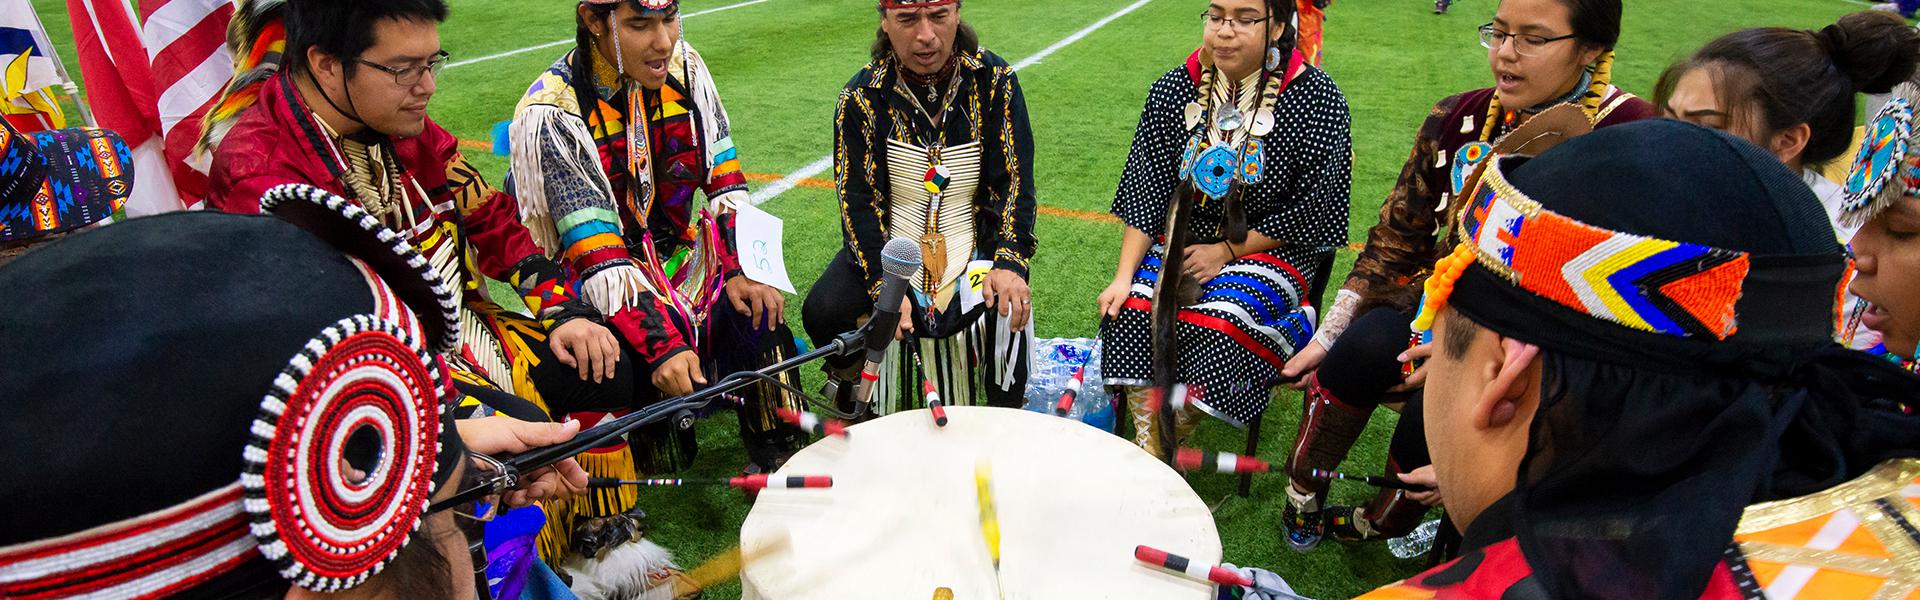 Local First Nations' drumming and singing